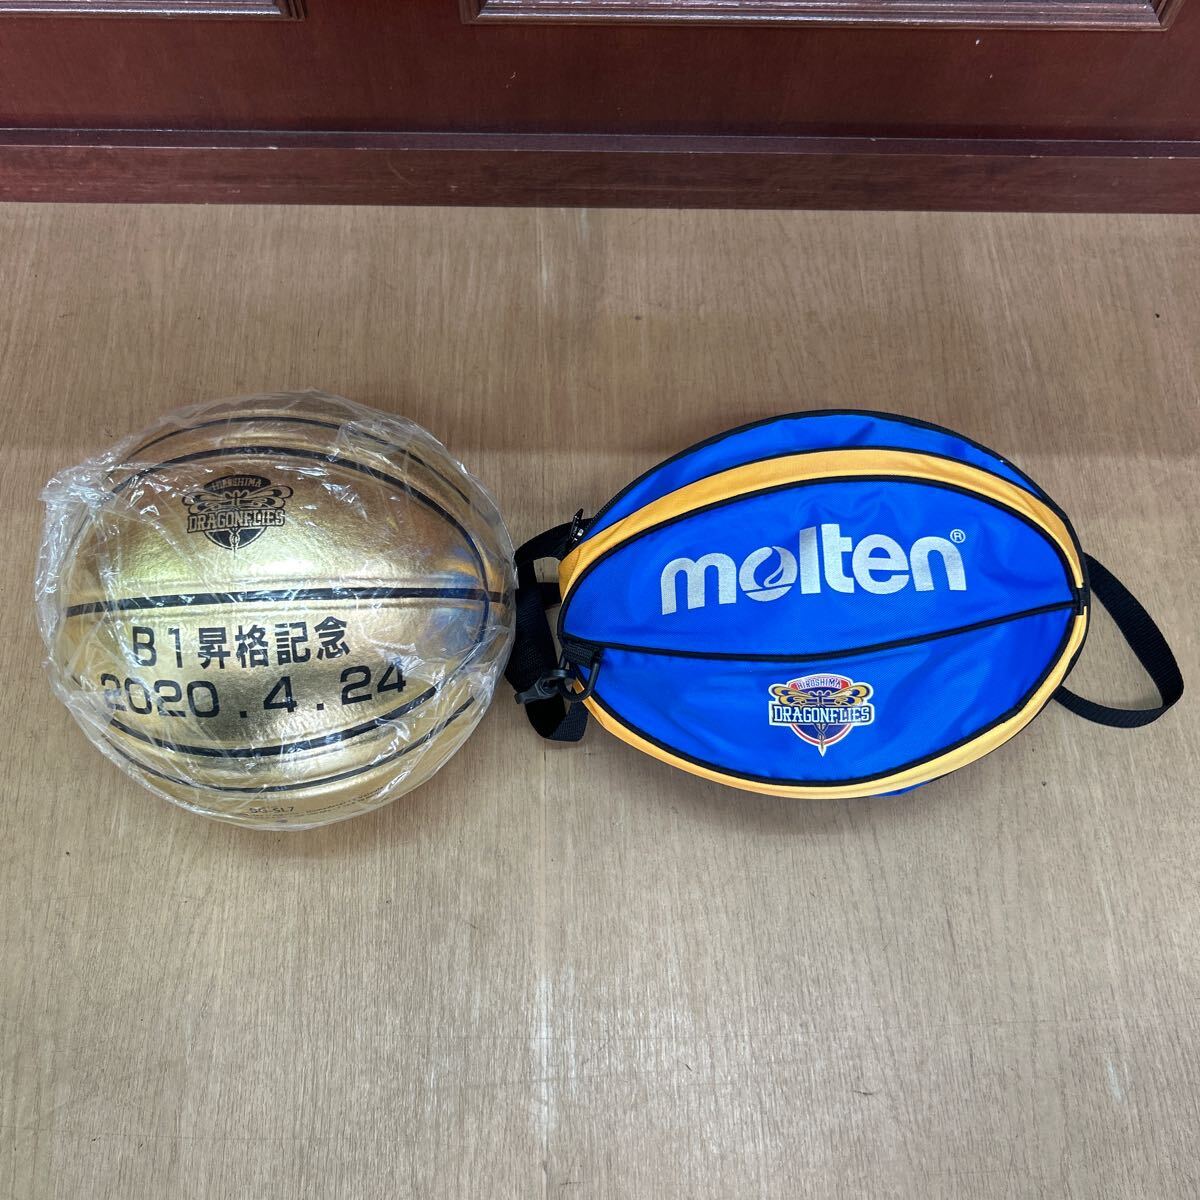  unopened goods moltenmoru ton Gold basketball gong ngon fly zB1.. memory 2020*4.24 BG-SL7 case attaching 